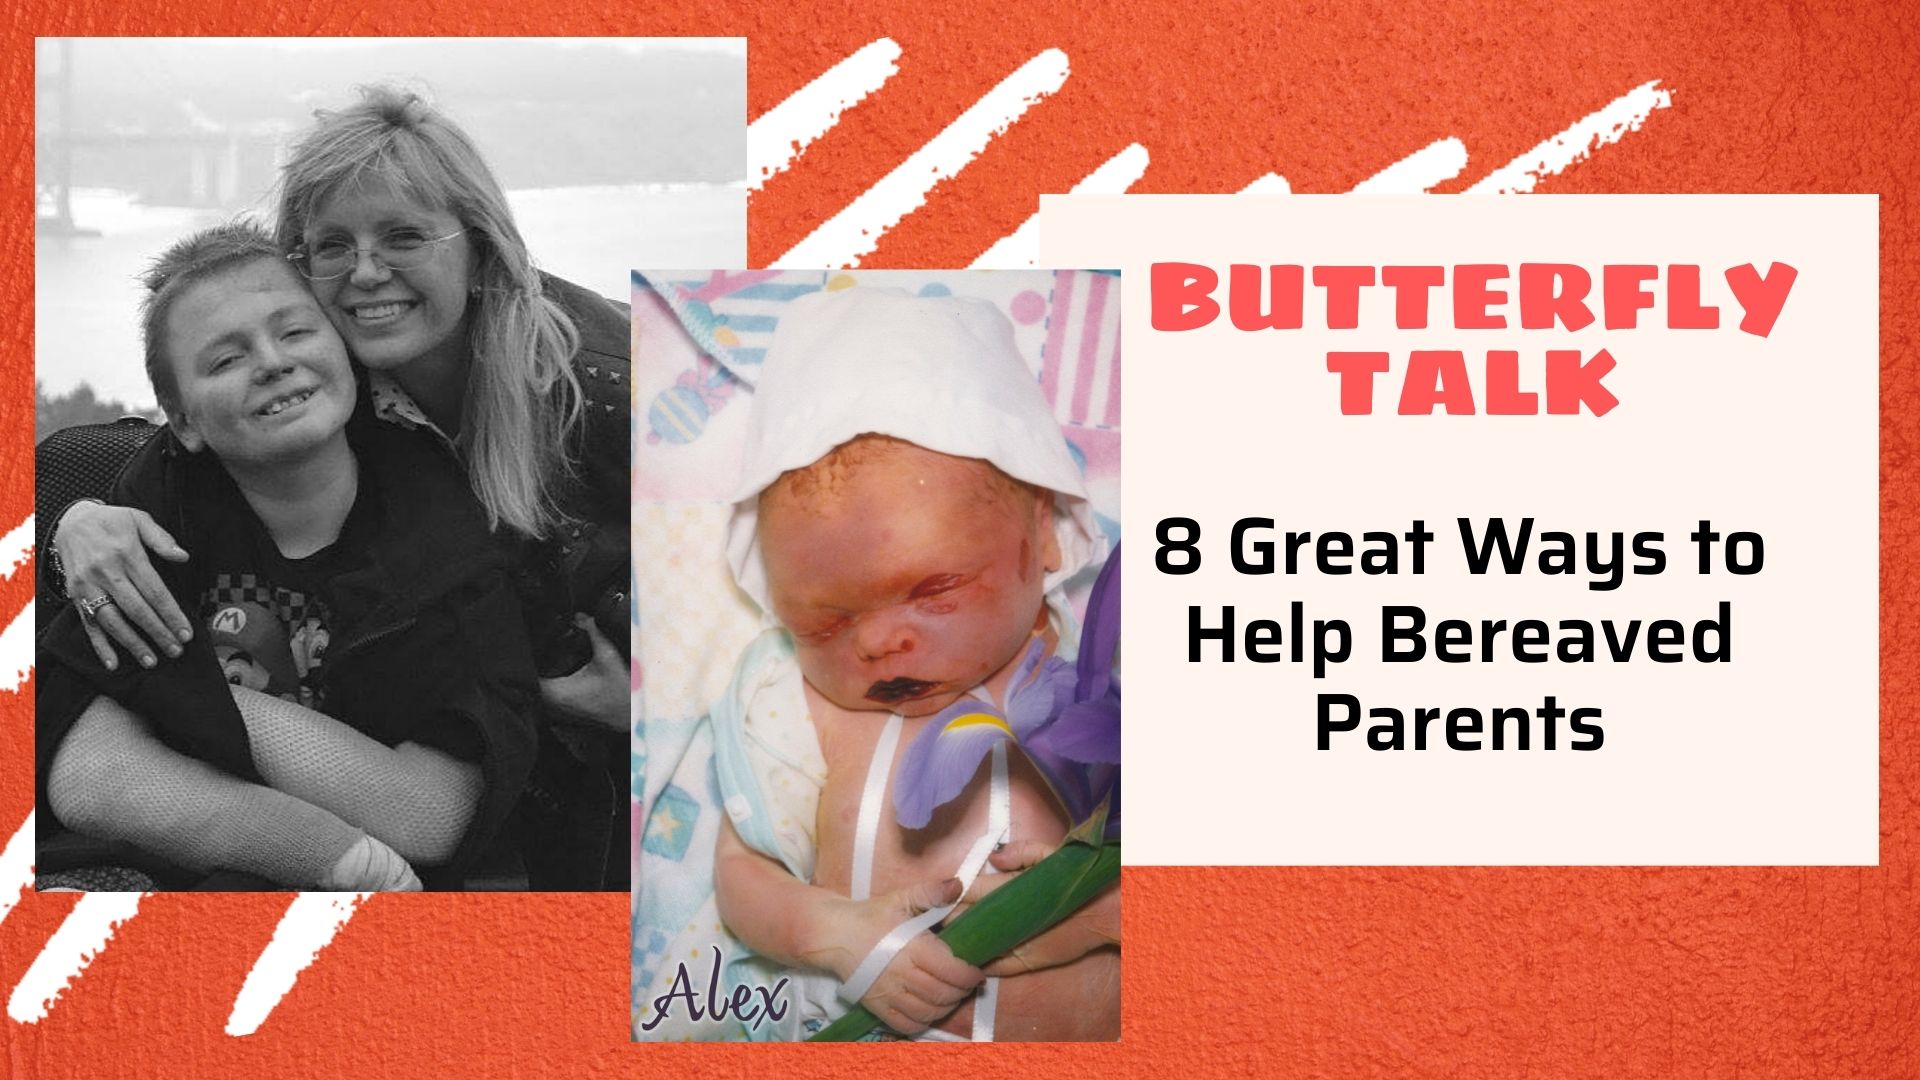 Butterfly Talk Episode 13 - 8 Great Ways to Help Bereaved Parents